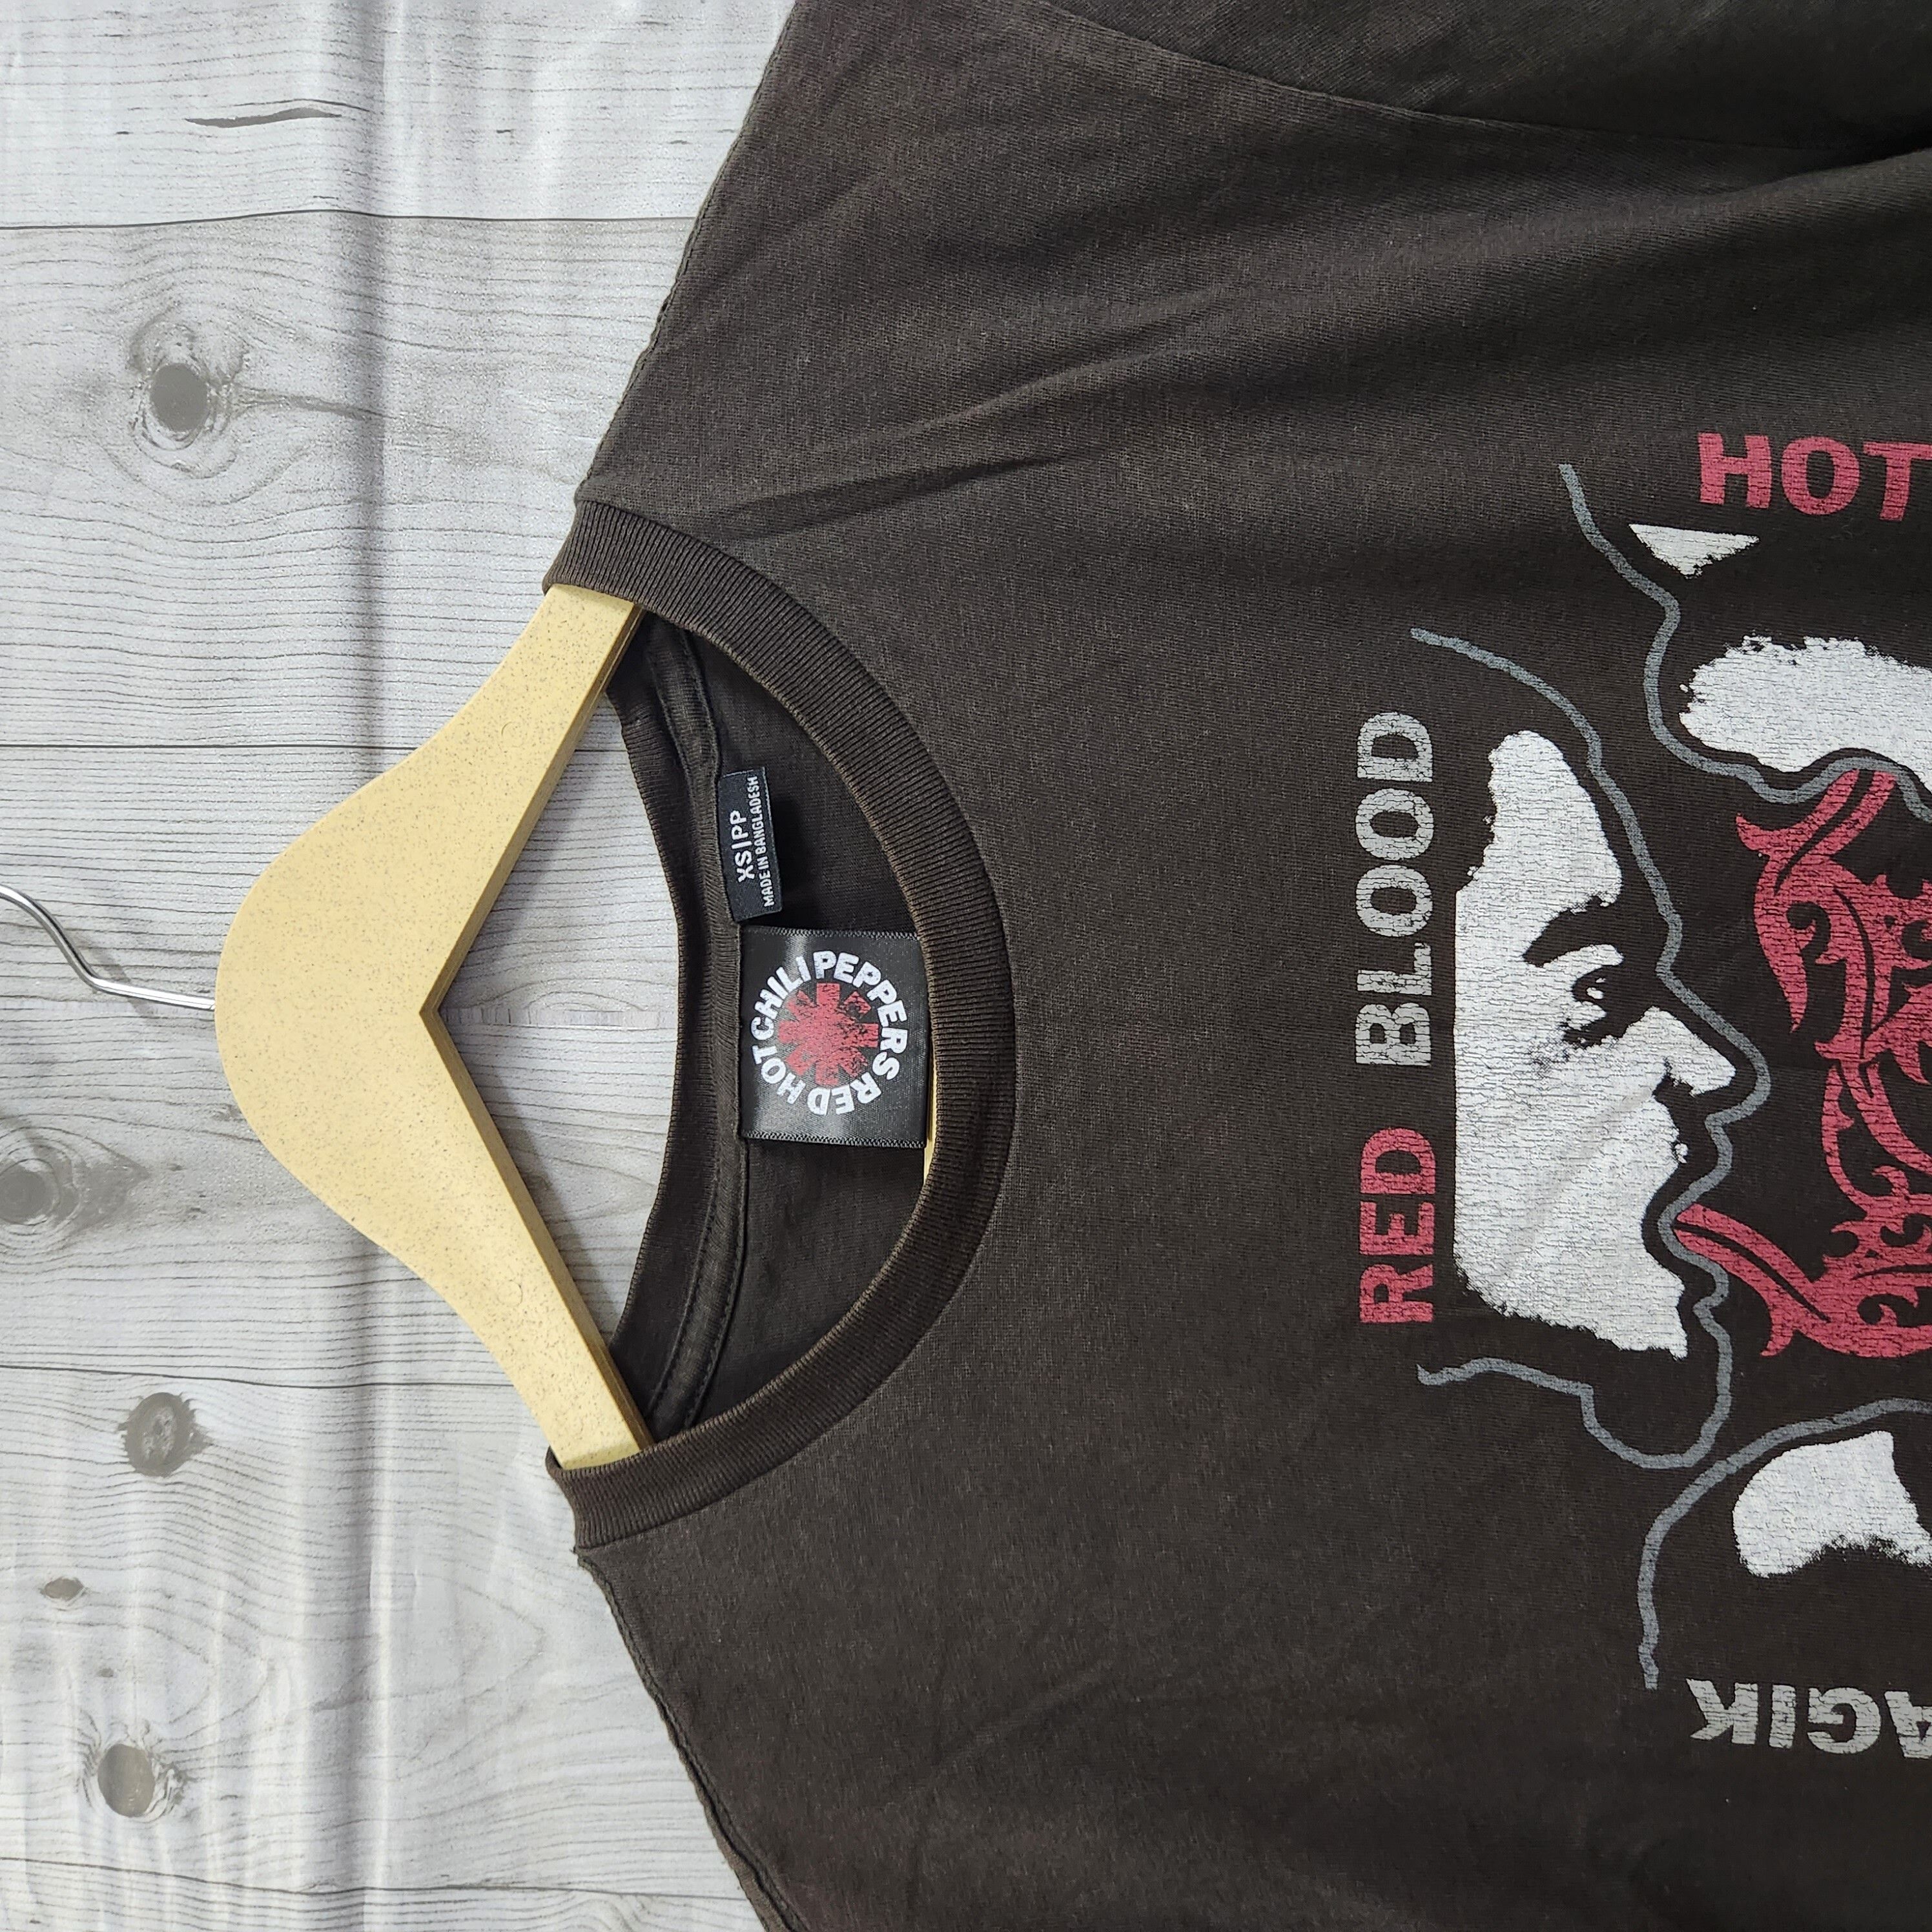 Band Tees - Vintage Red Hot Chili Peppers Iconic TShirt - 13